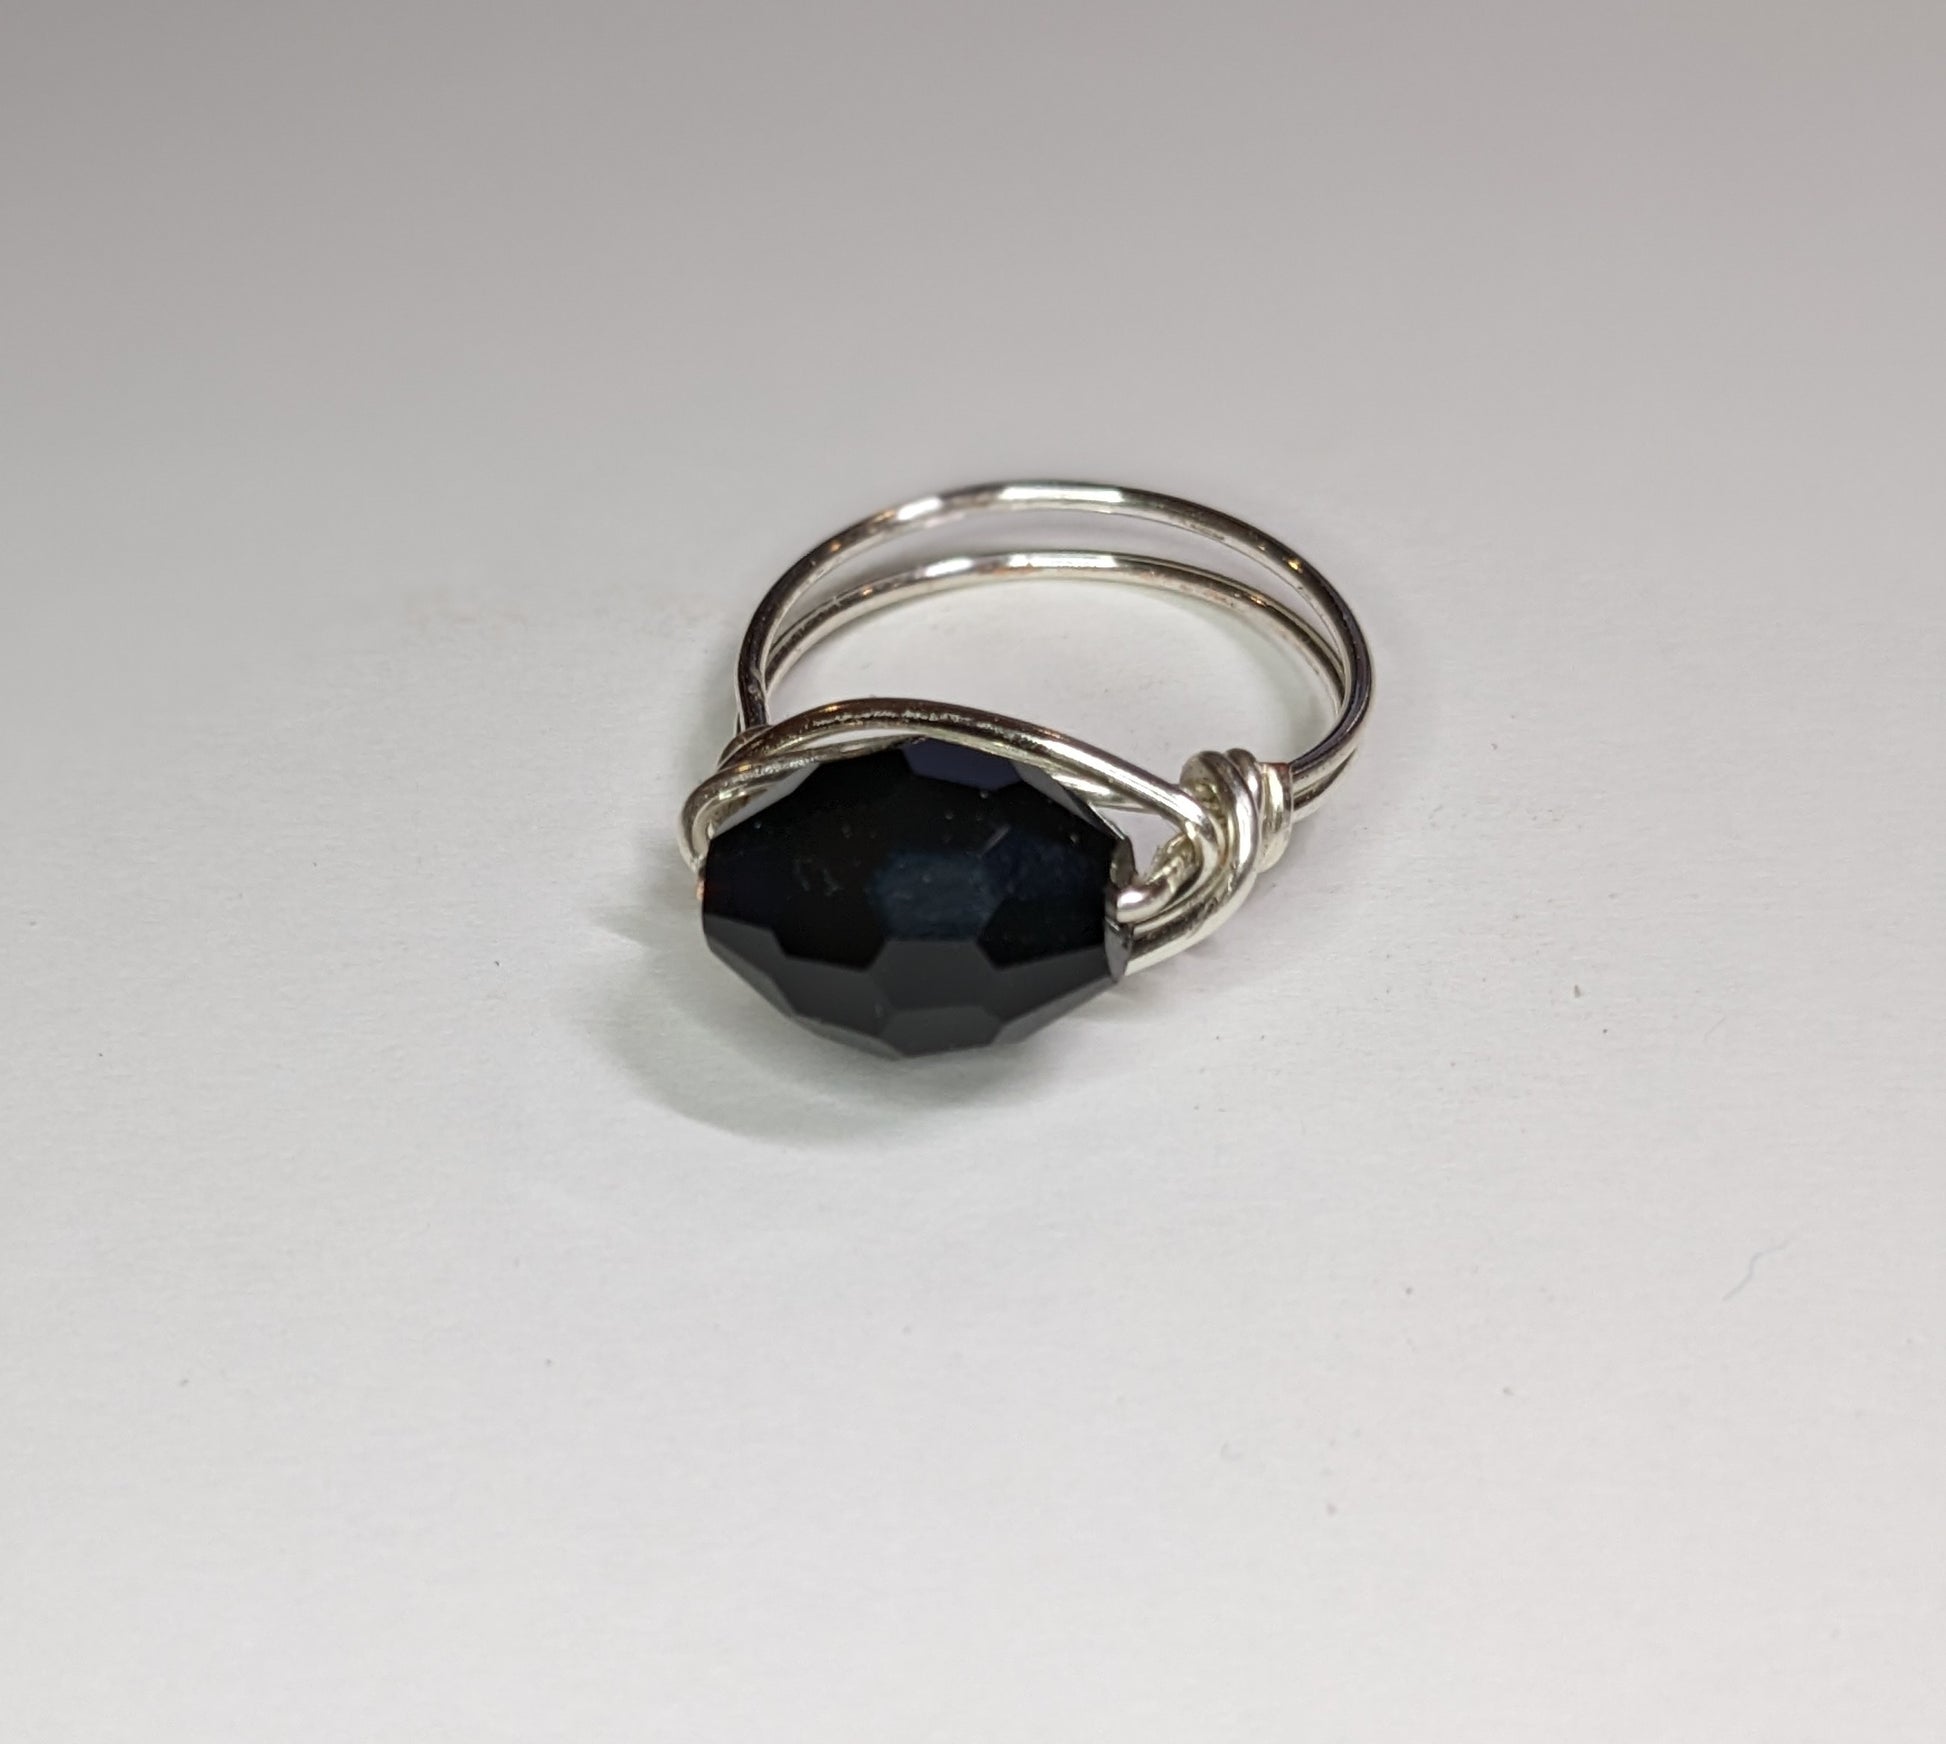 Close up for wire wrapped black glass faceted ring with ring pointing slightly to the left to show details.